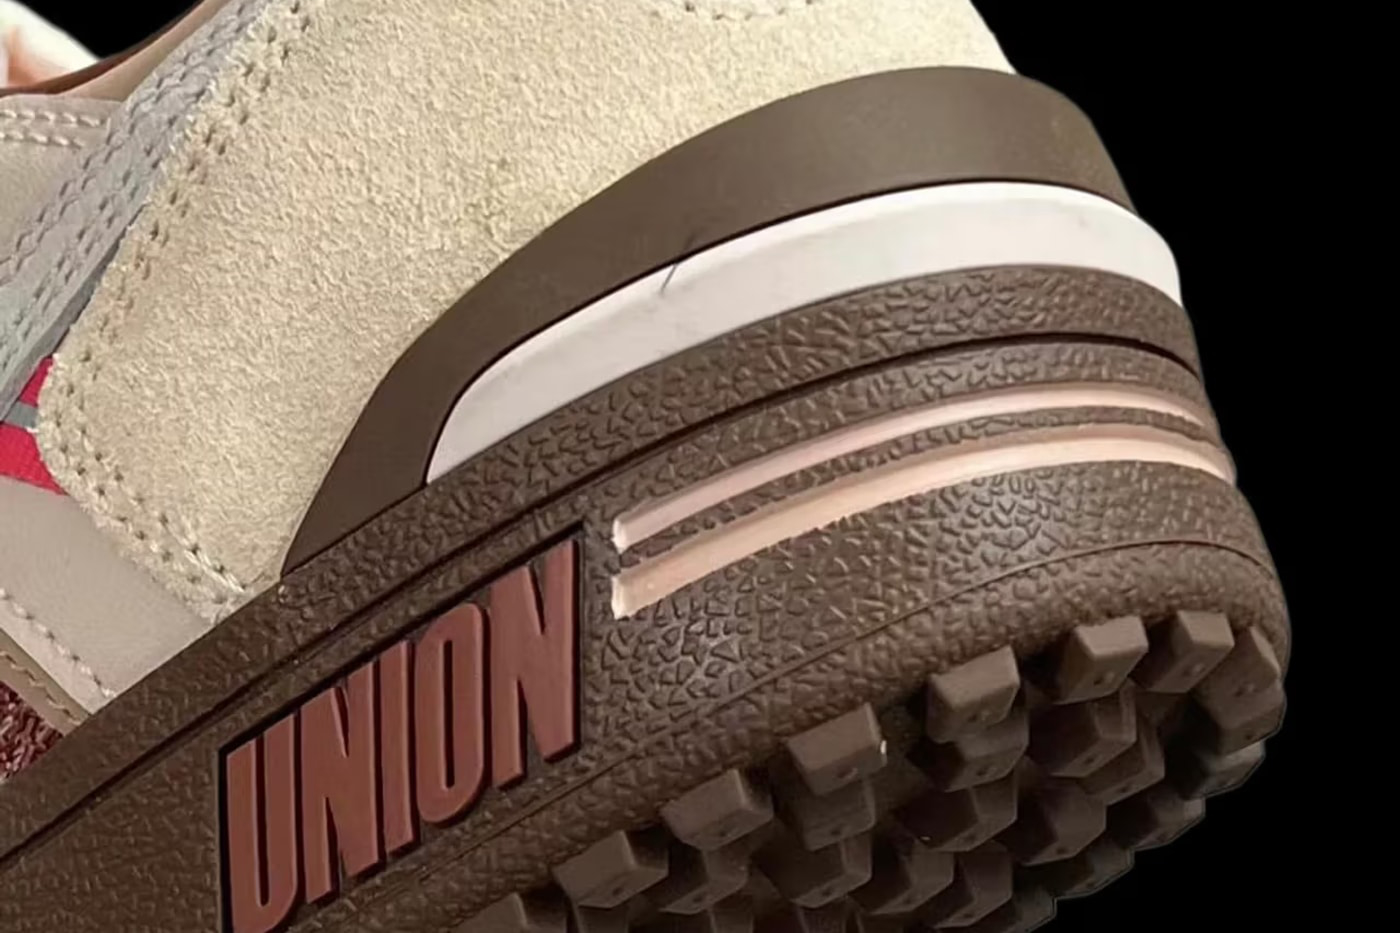 Union’s New Nike Collab Is So Very Union